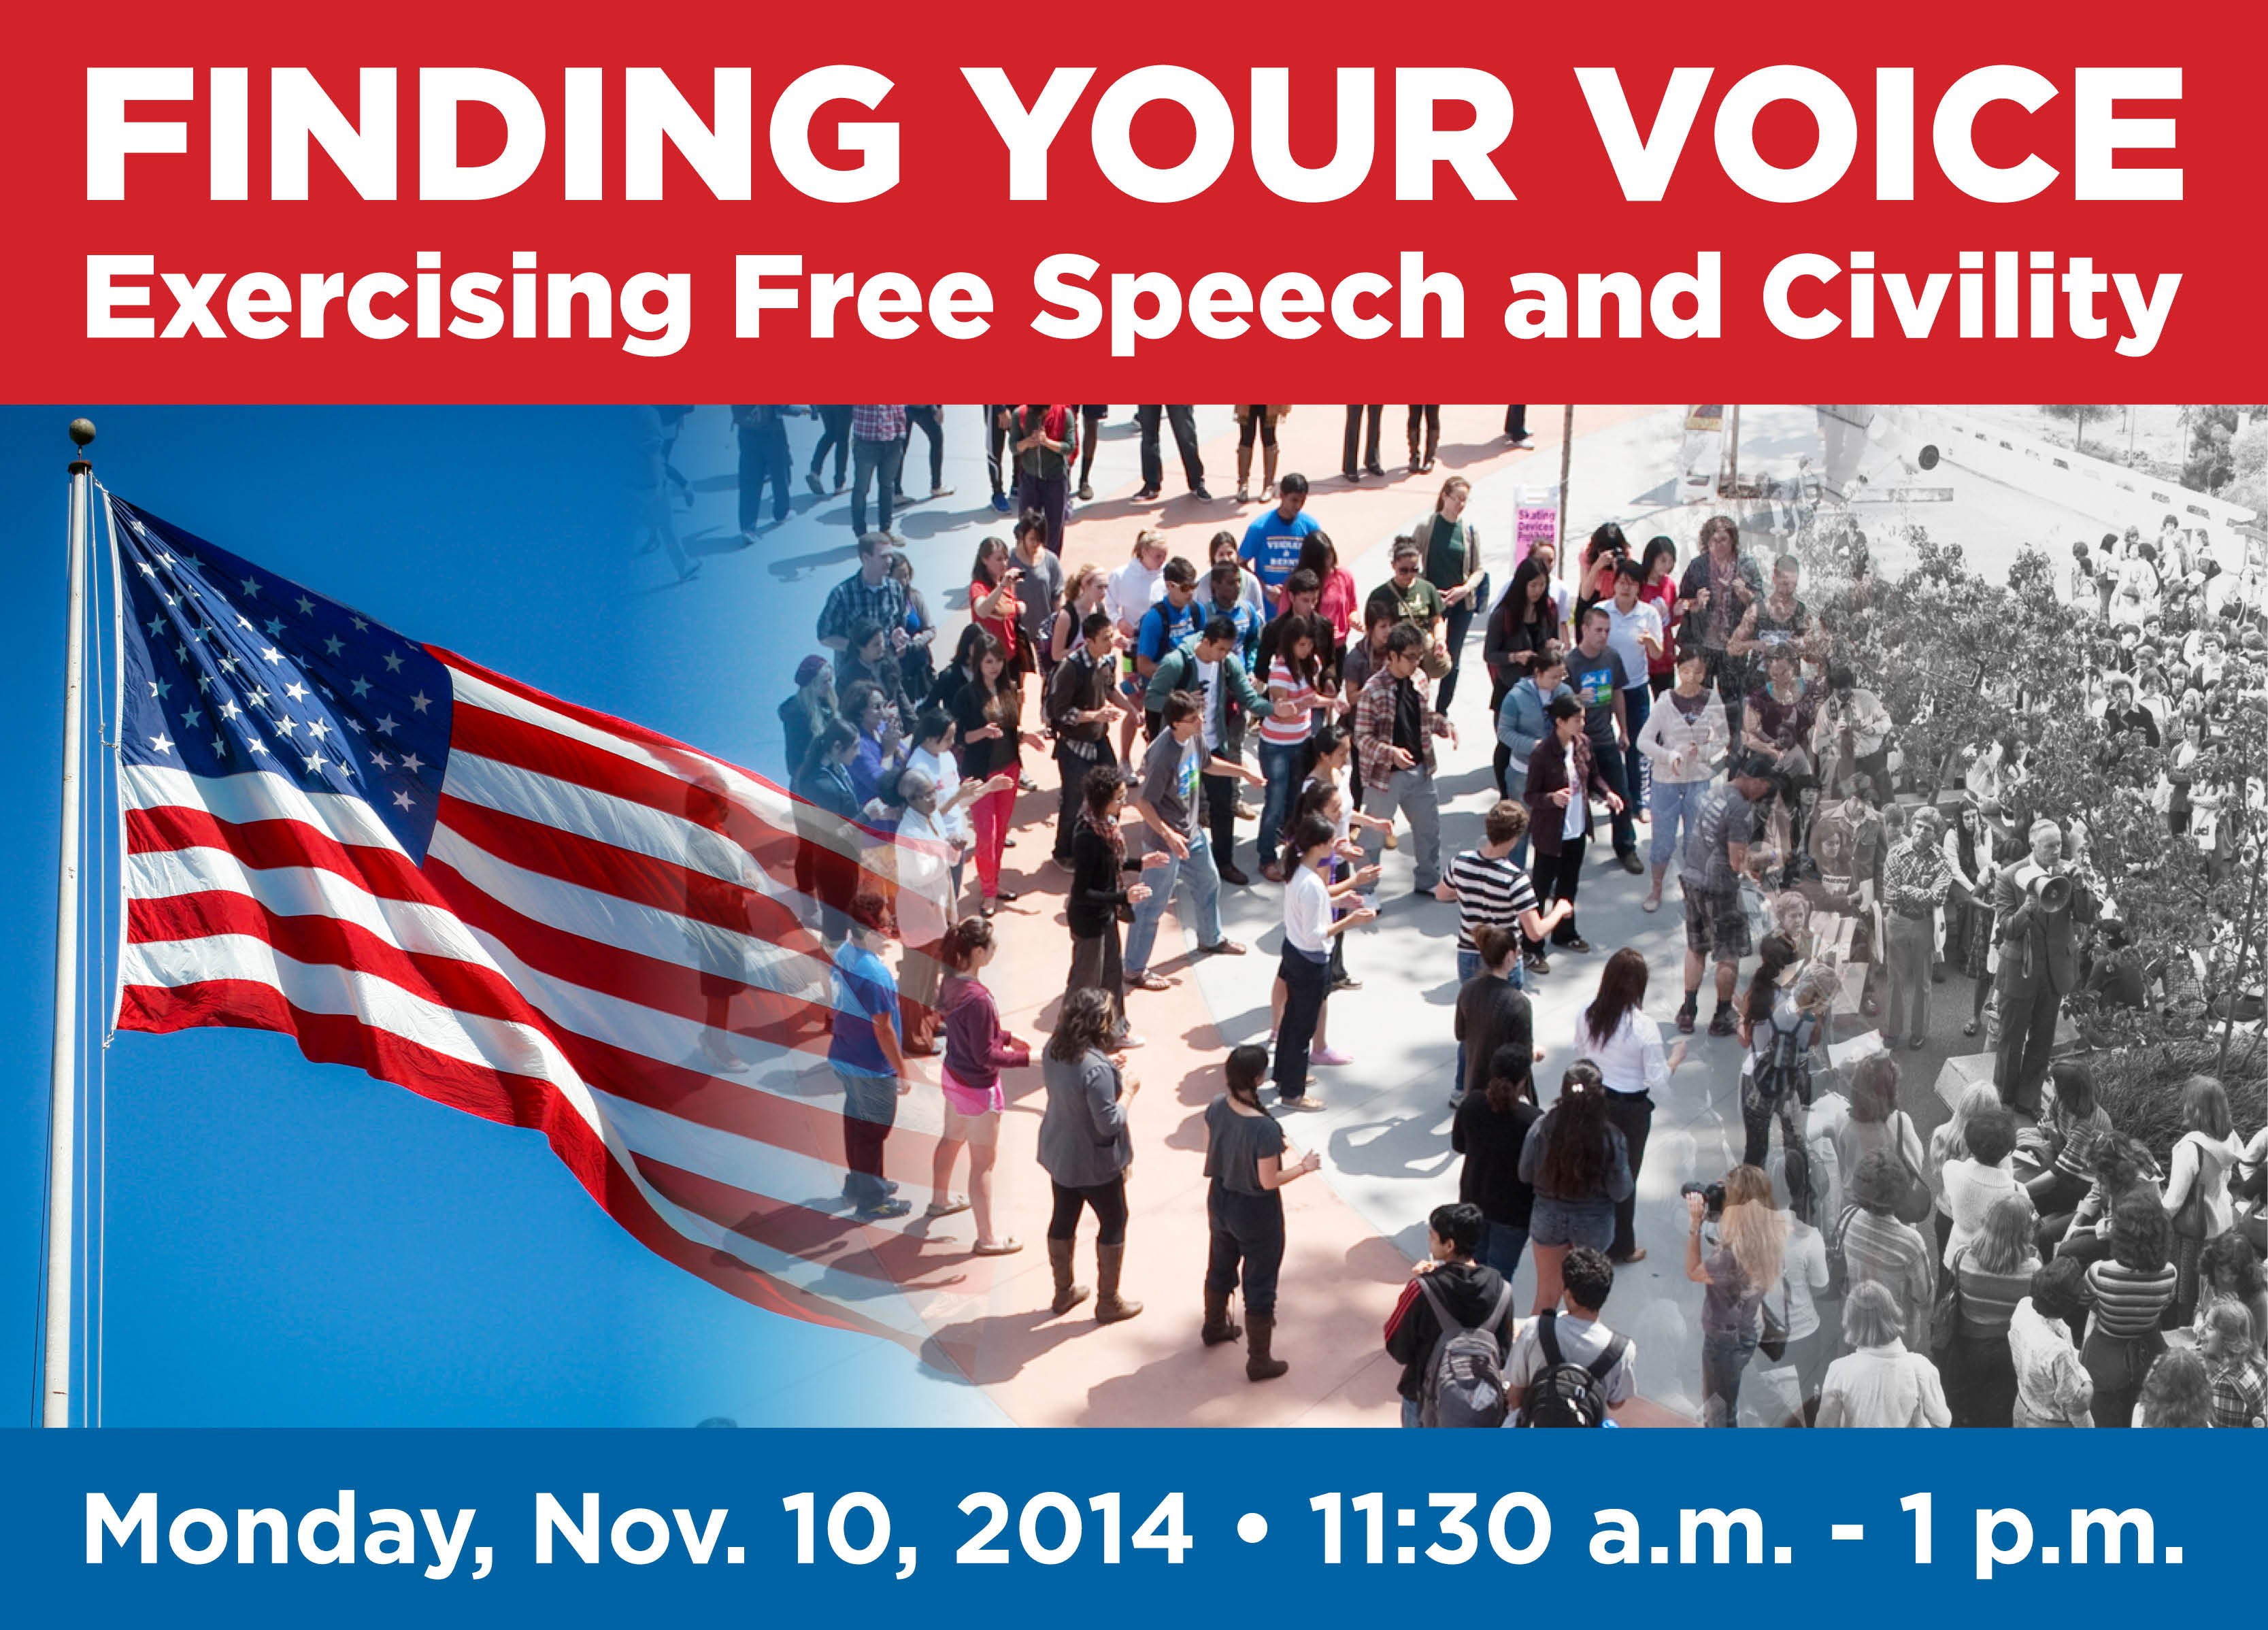 Finding your voice: Exercising Free Speech & Civility - Monday, Nov. 10, 11:30 a.m. - 1:00 p.m.